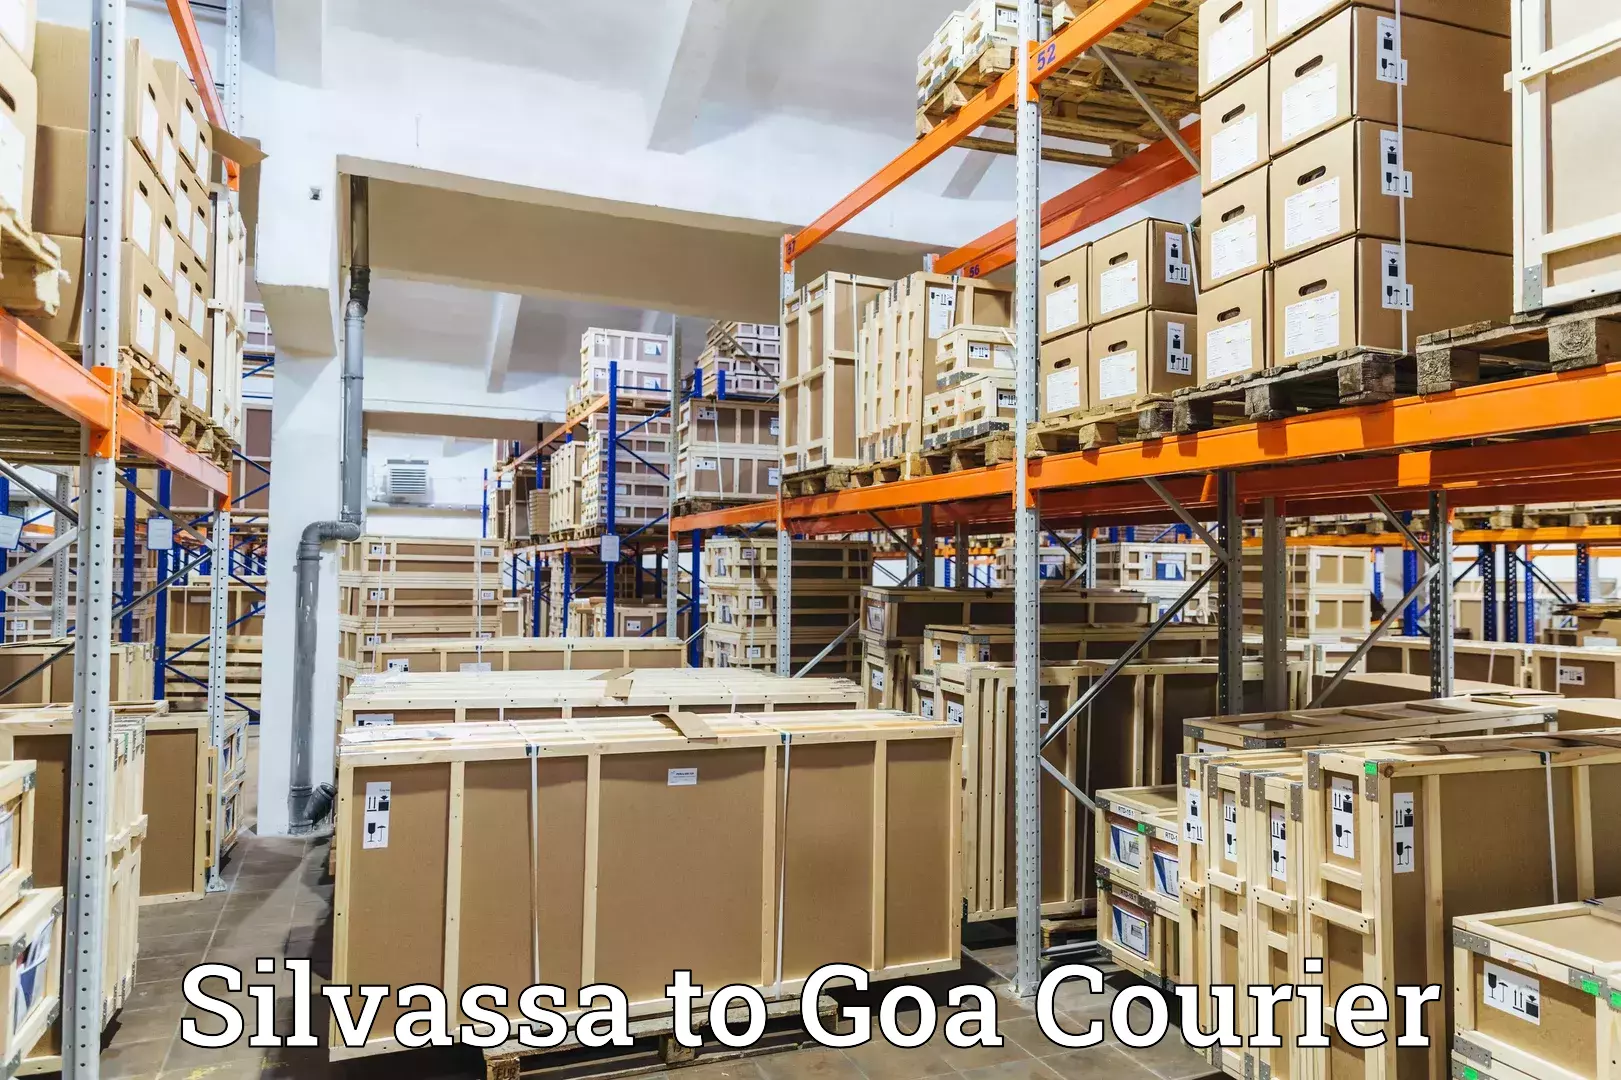 State-of-the-art courier technology Silvassa to Goa